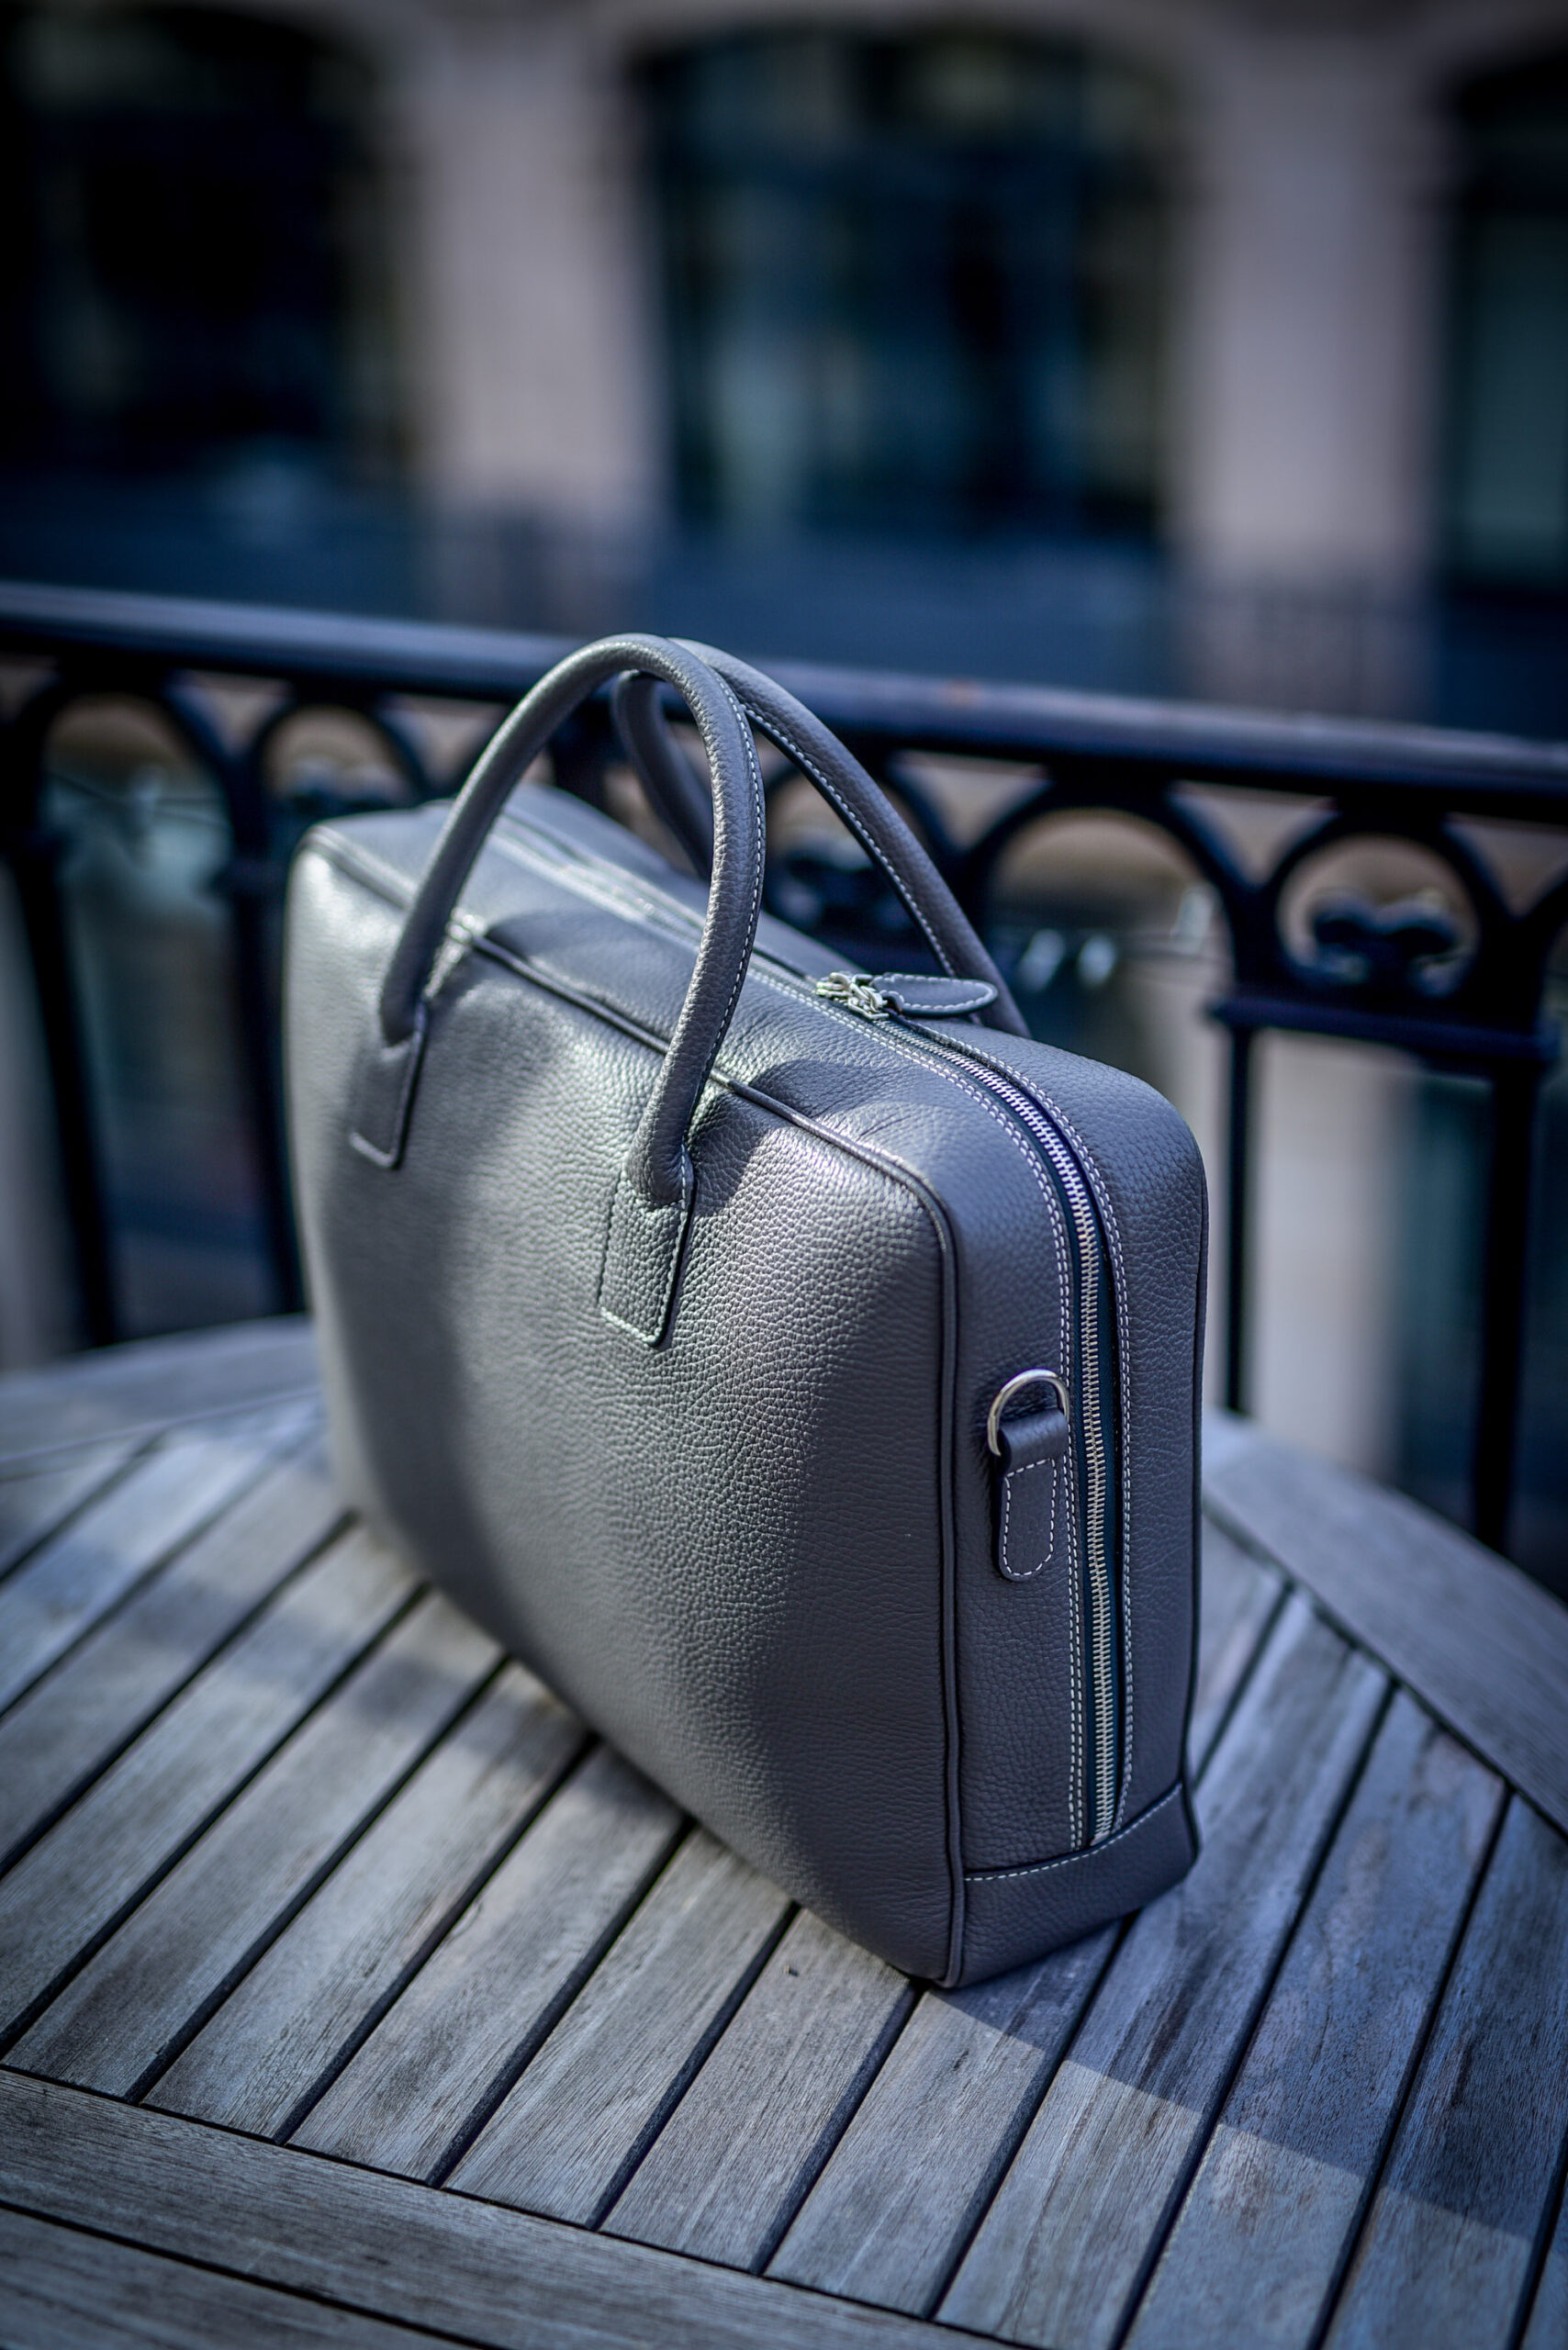 Borromee bag in grey taurillon - The city bags bags - Aubercy